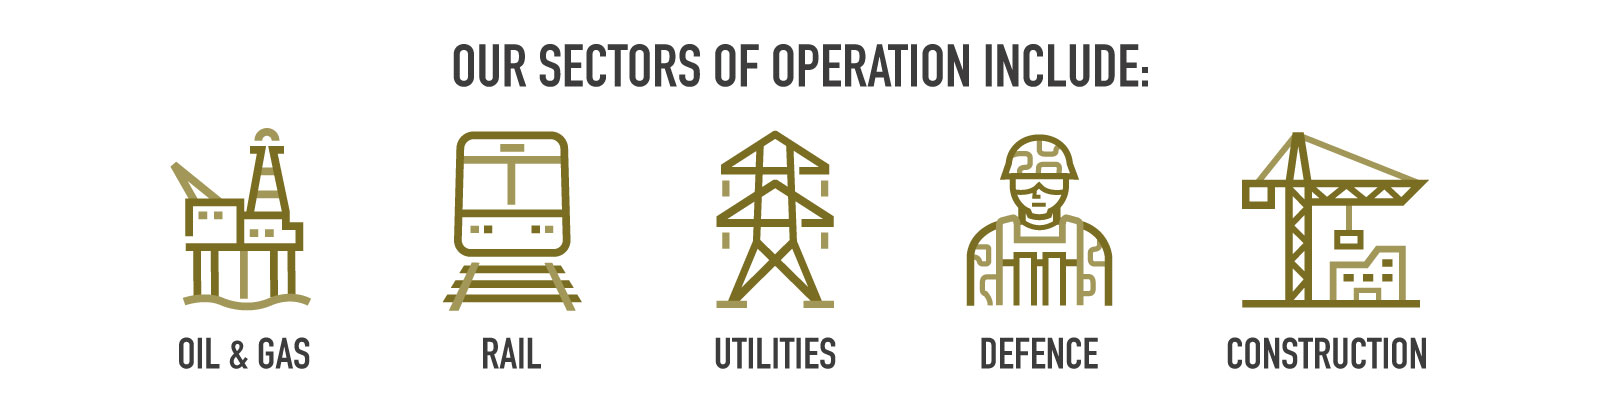 Lode Industry Sectors: Oil & Gas, Rail, Utilities, Defence, Construction